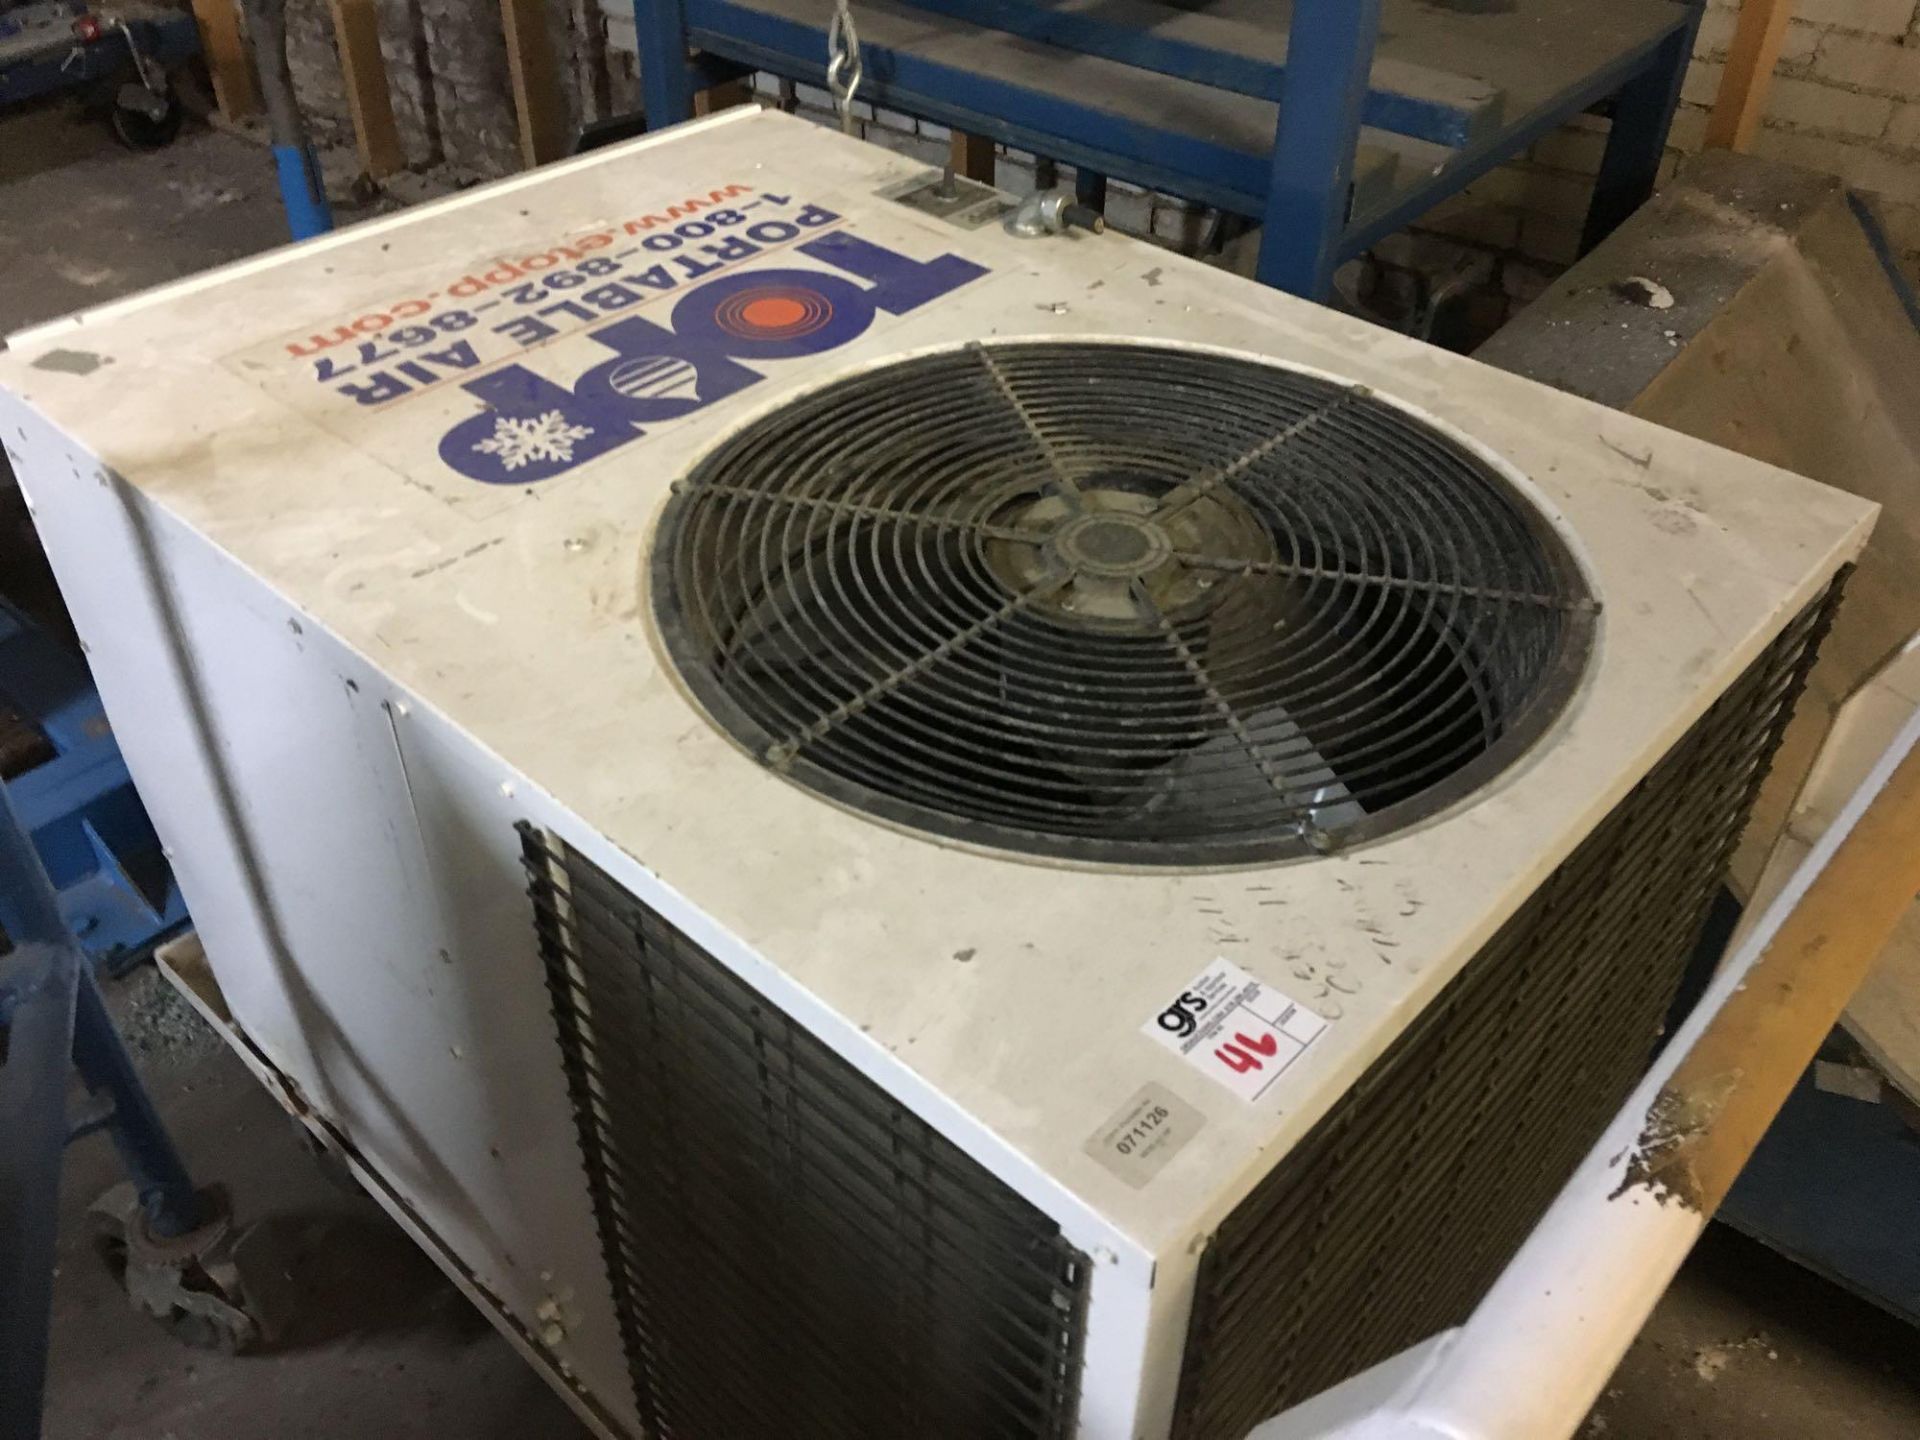 Topp Air Conditioner with Casters - Image 2 of 3